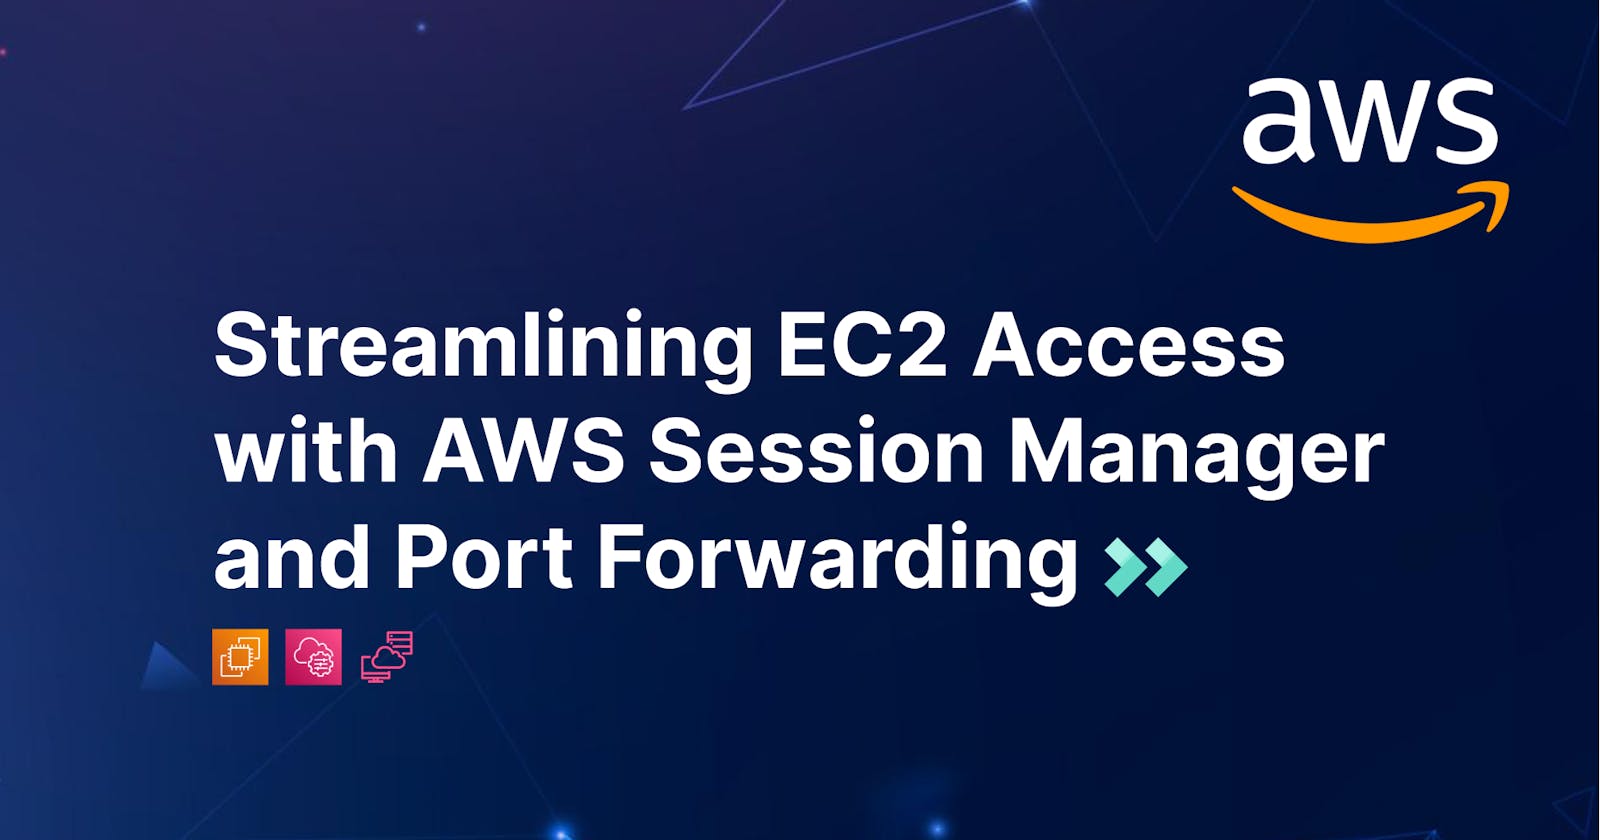 Streamlining EC2 Access with AWS Session Manager and Port Forwarding: An In-Depth Guide